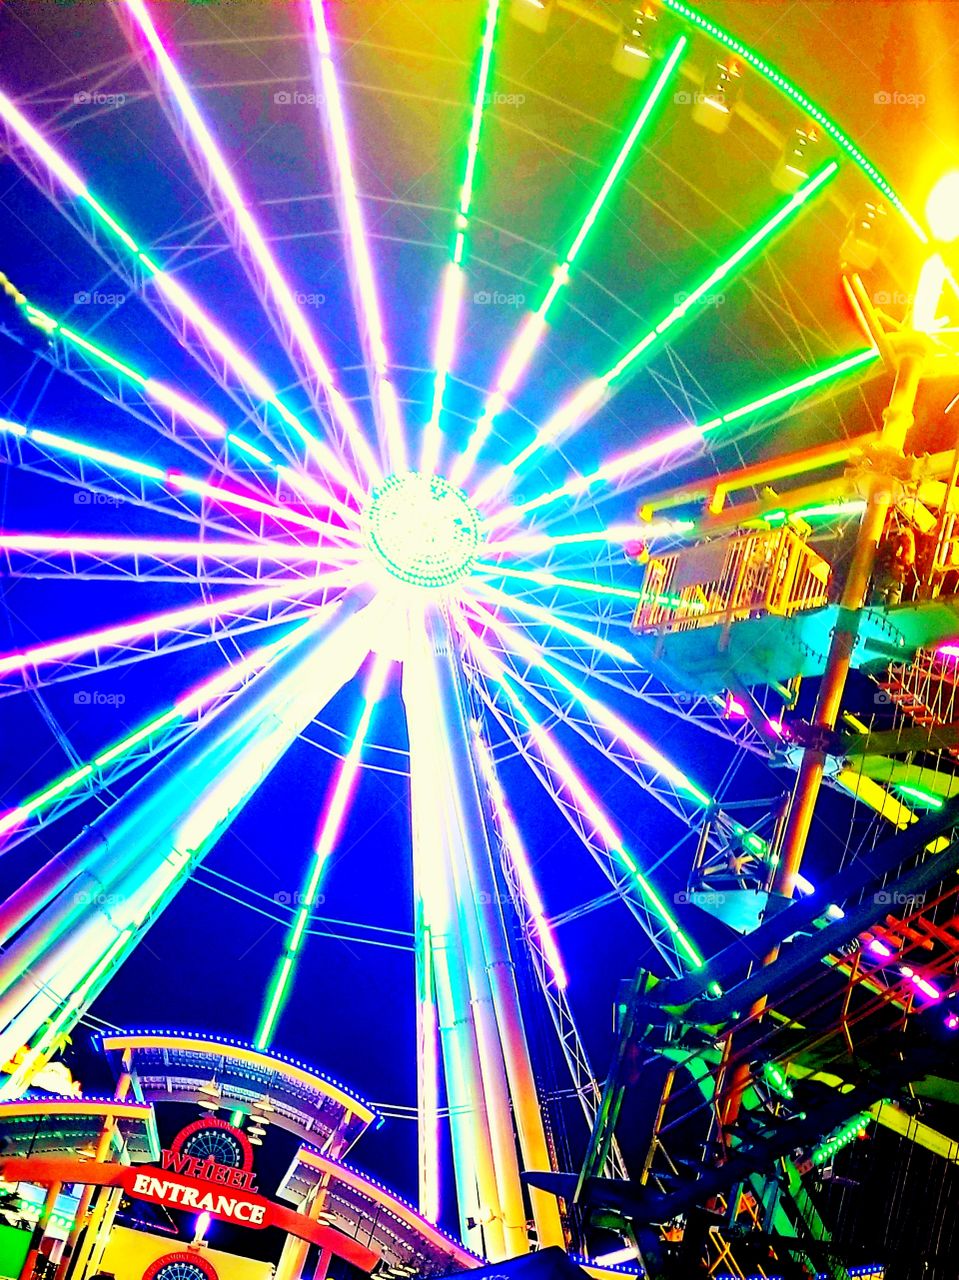 Lit up summer nights at the fair with the spokes of multicolored LED lights on the ferris wheel and fun vibe being sent.